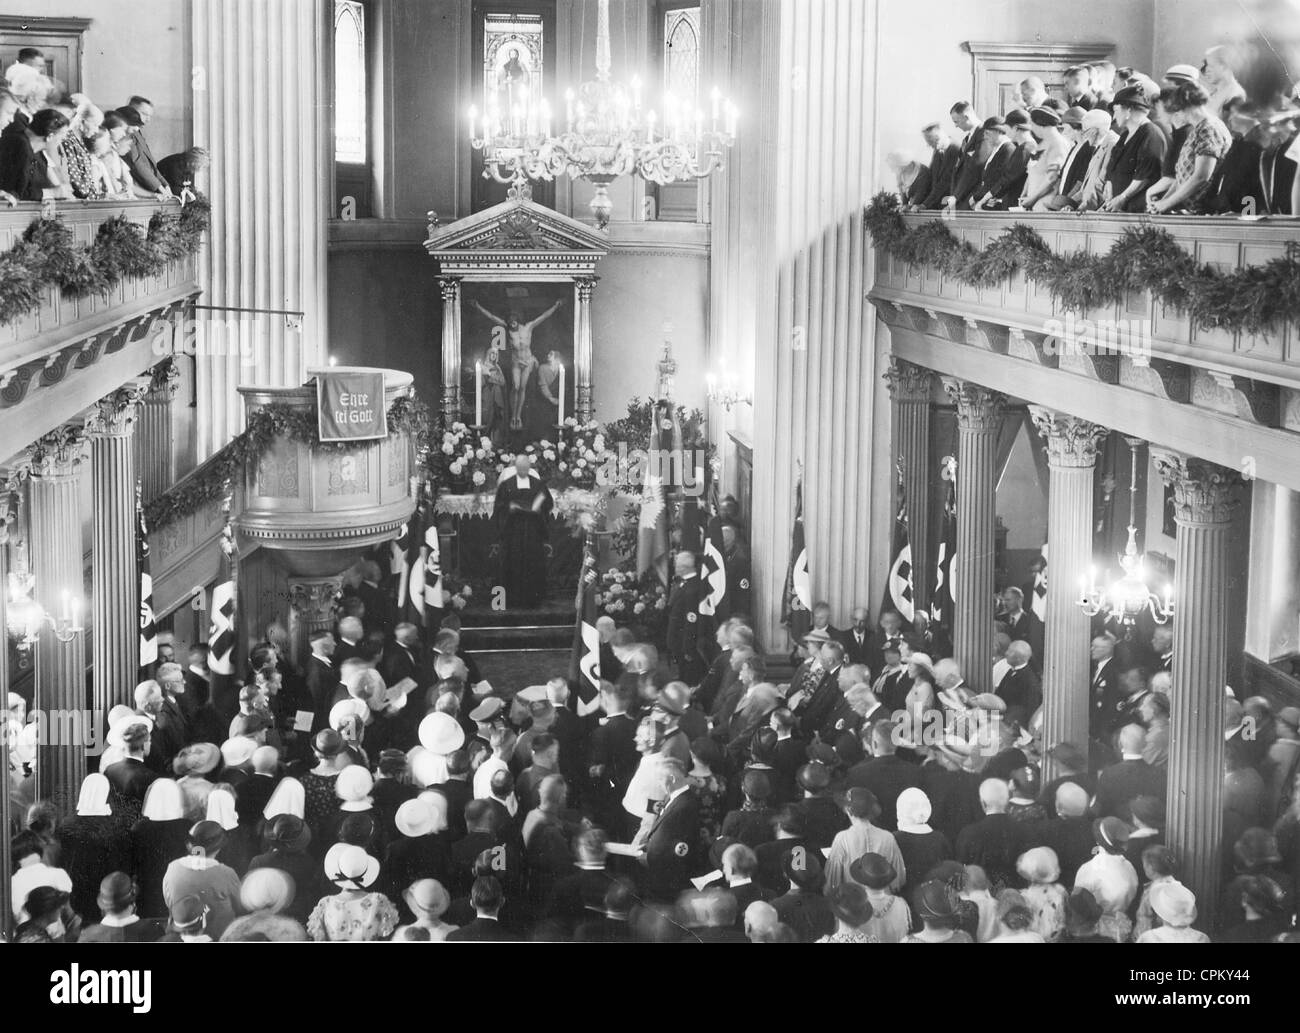 Mass service for the 100th anniversary of existence of St Paul's Church in Berlin, 1935 Stock Photo